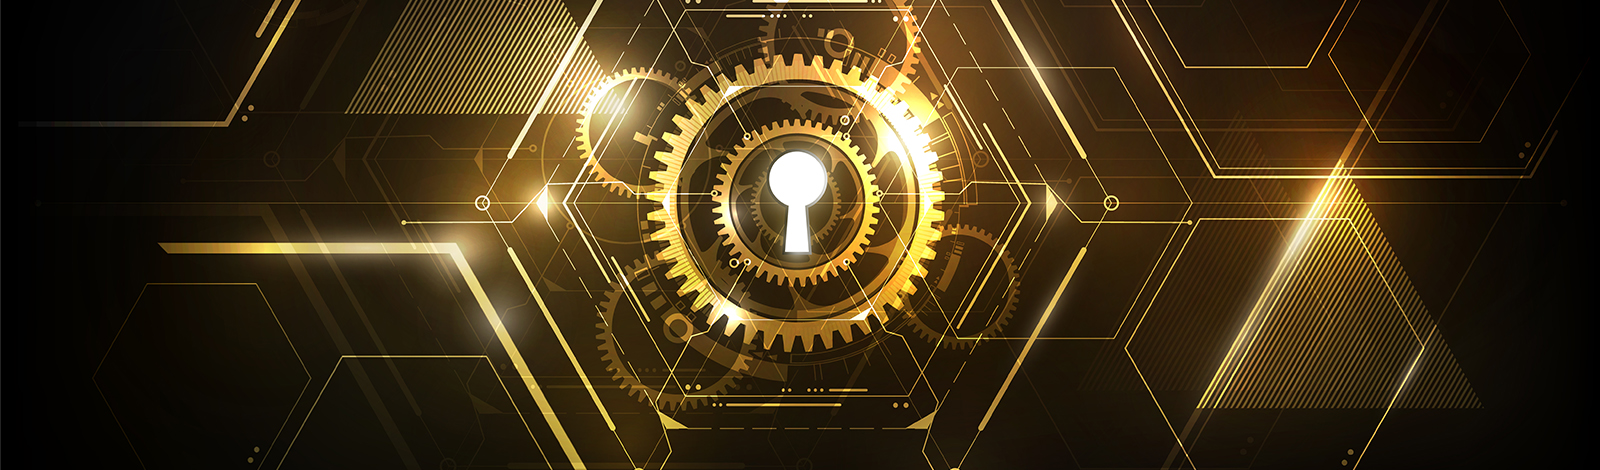 White key hole in the middle with golden graphics of gears and lines surrounding the hole, all on a dark background